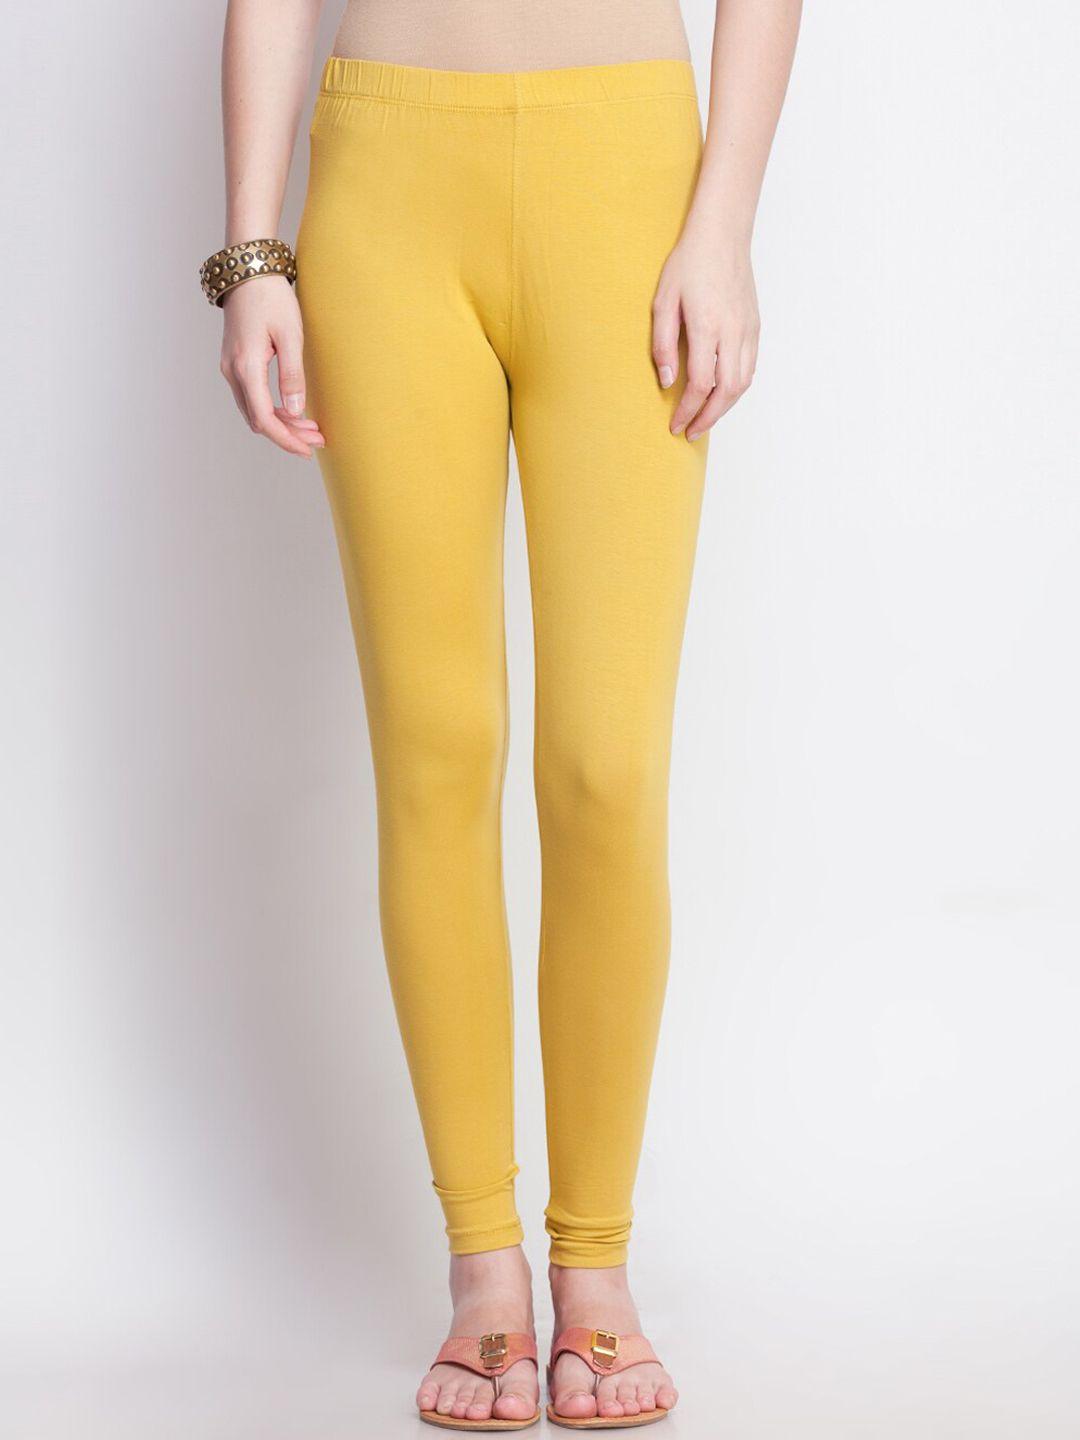 dollar-missy-women-gold-colored-cotton-slim-fit-ankle-length-leggings